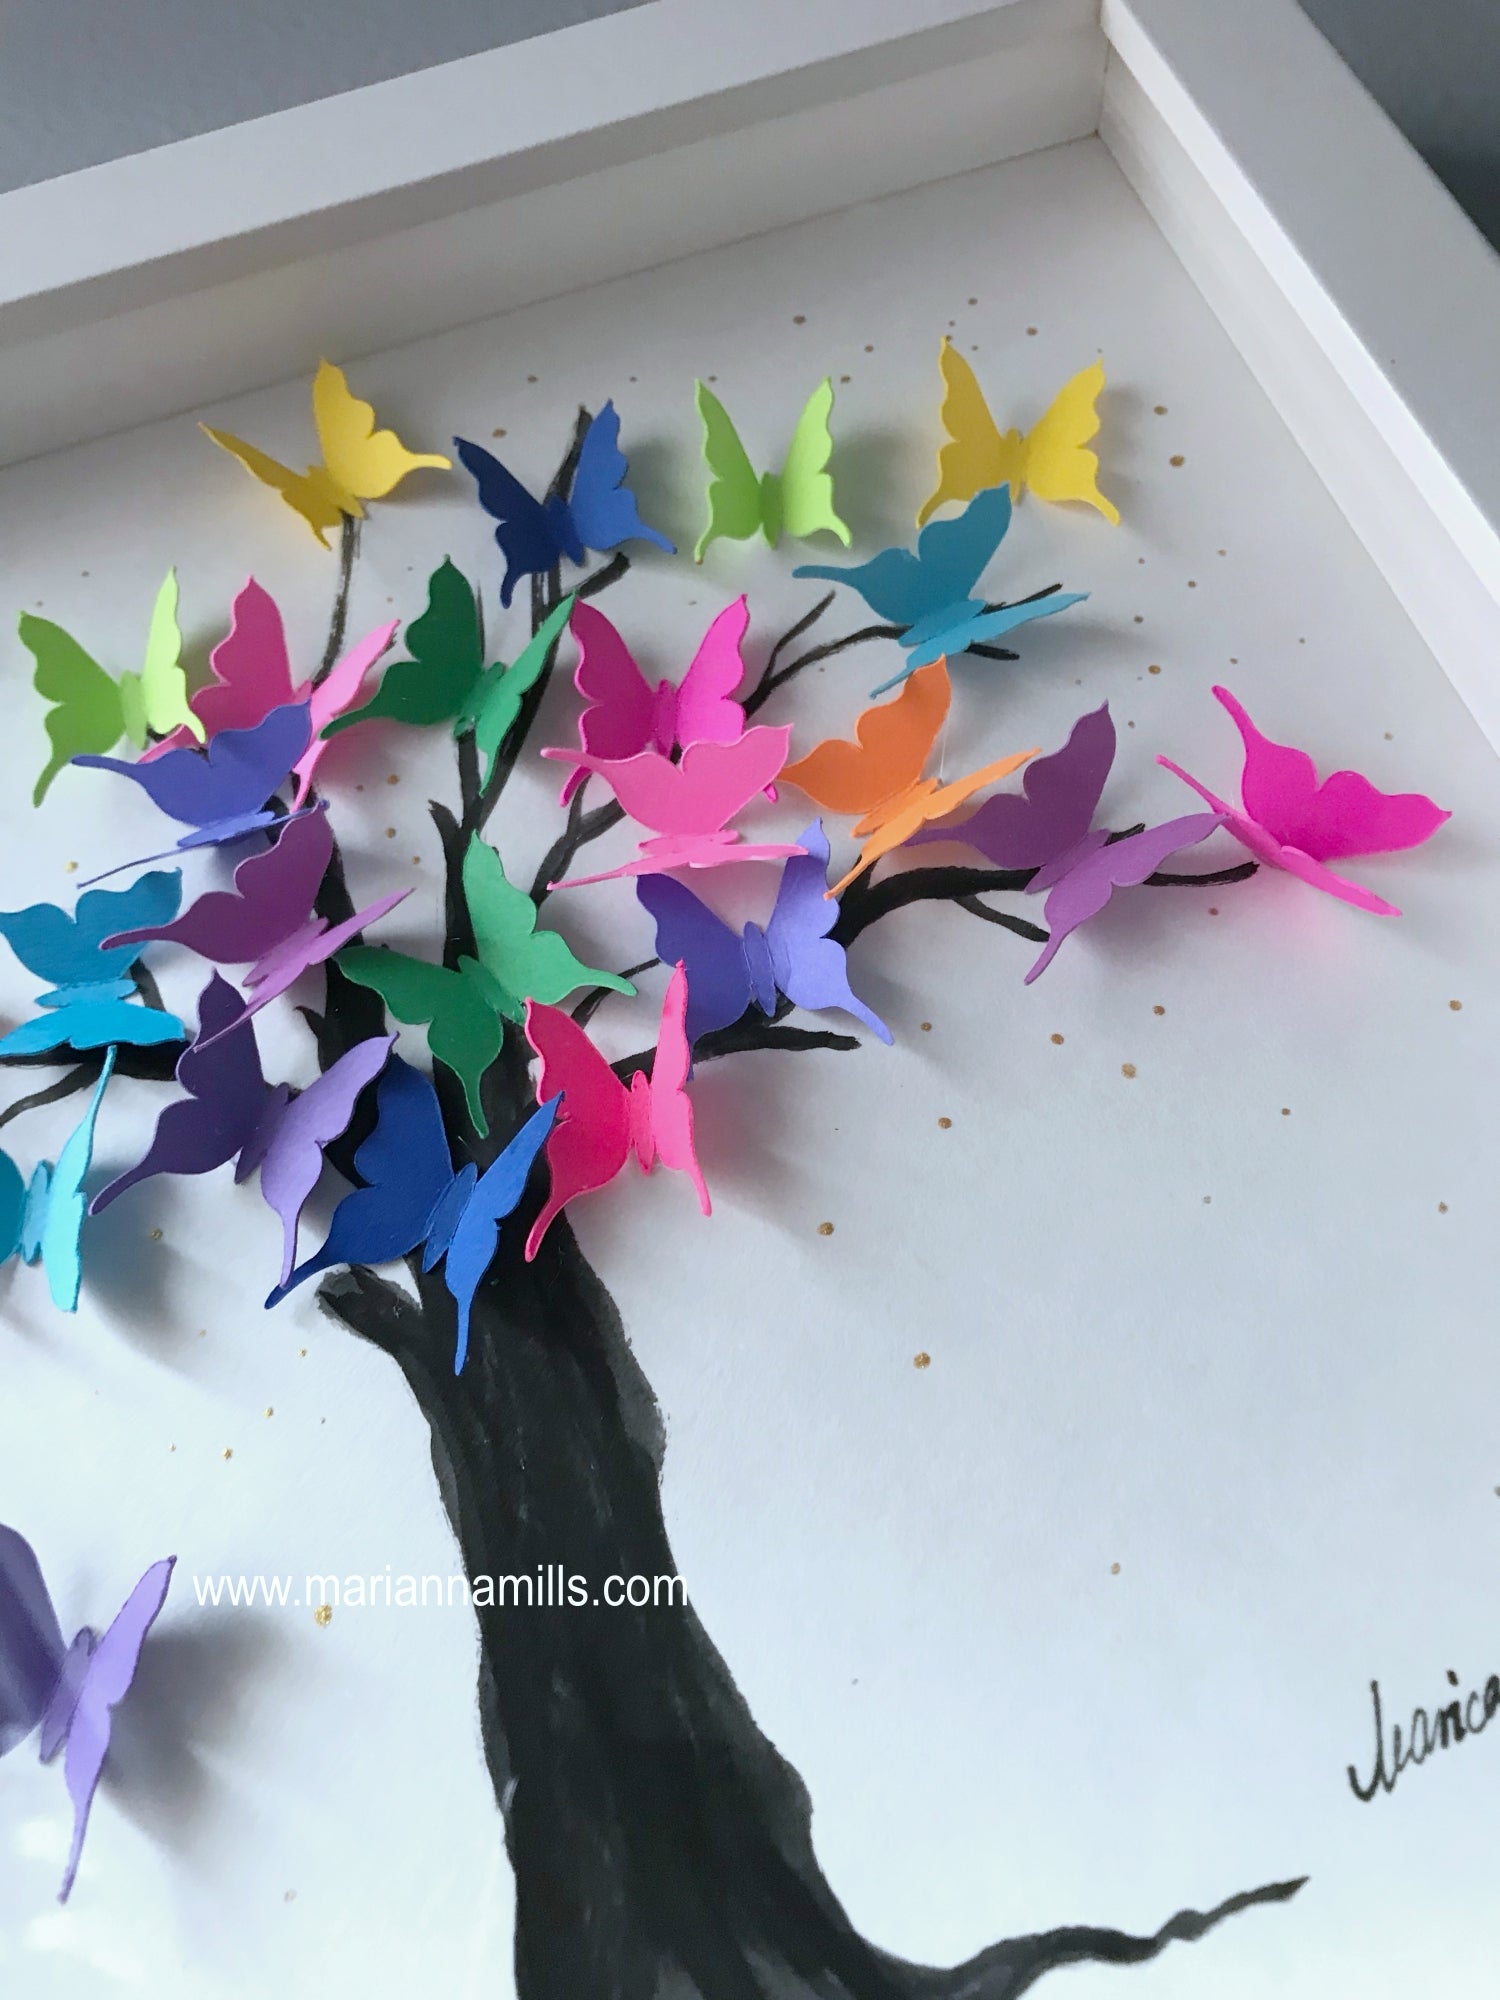 Rainbow Tree 2 - from my Butterfly Collection detail - Original Mixed Media Painting by Marianna Mills